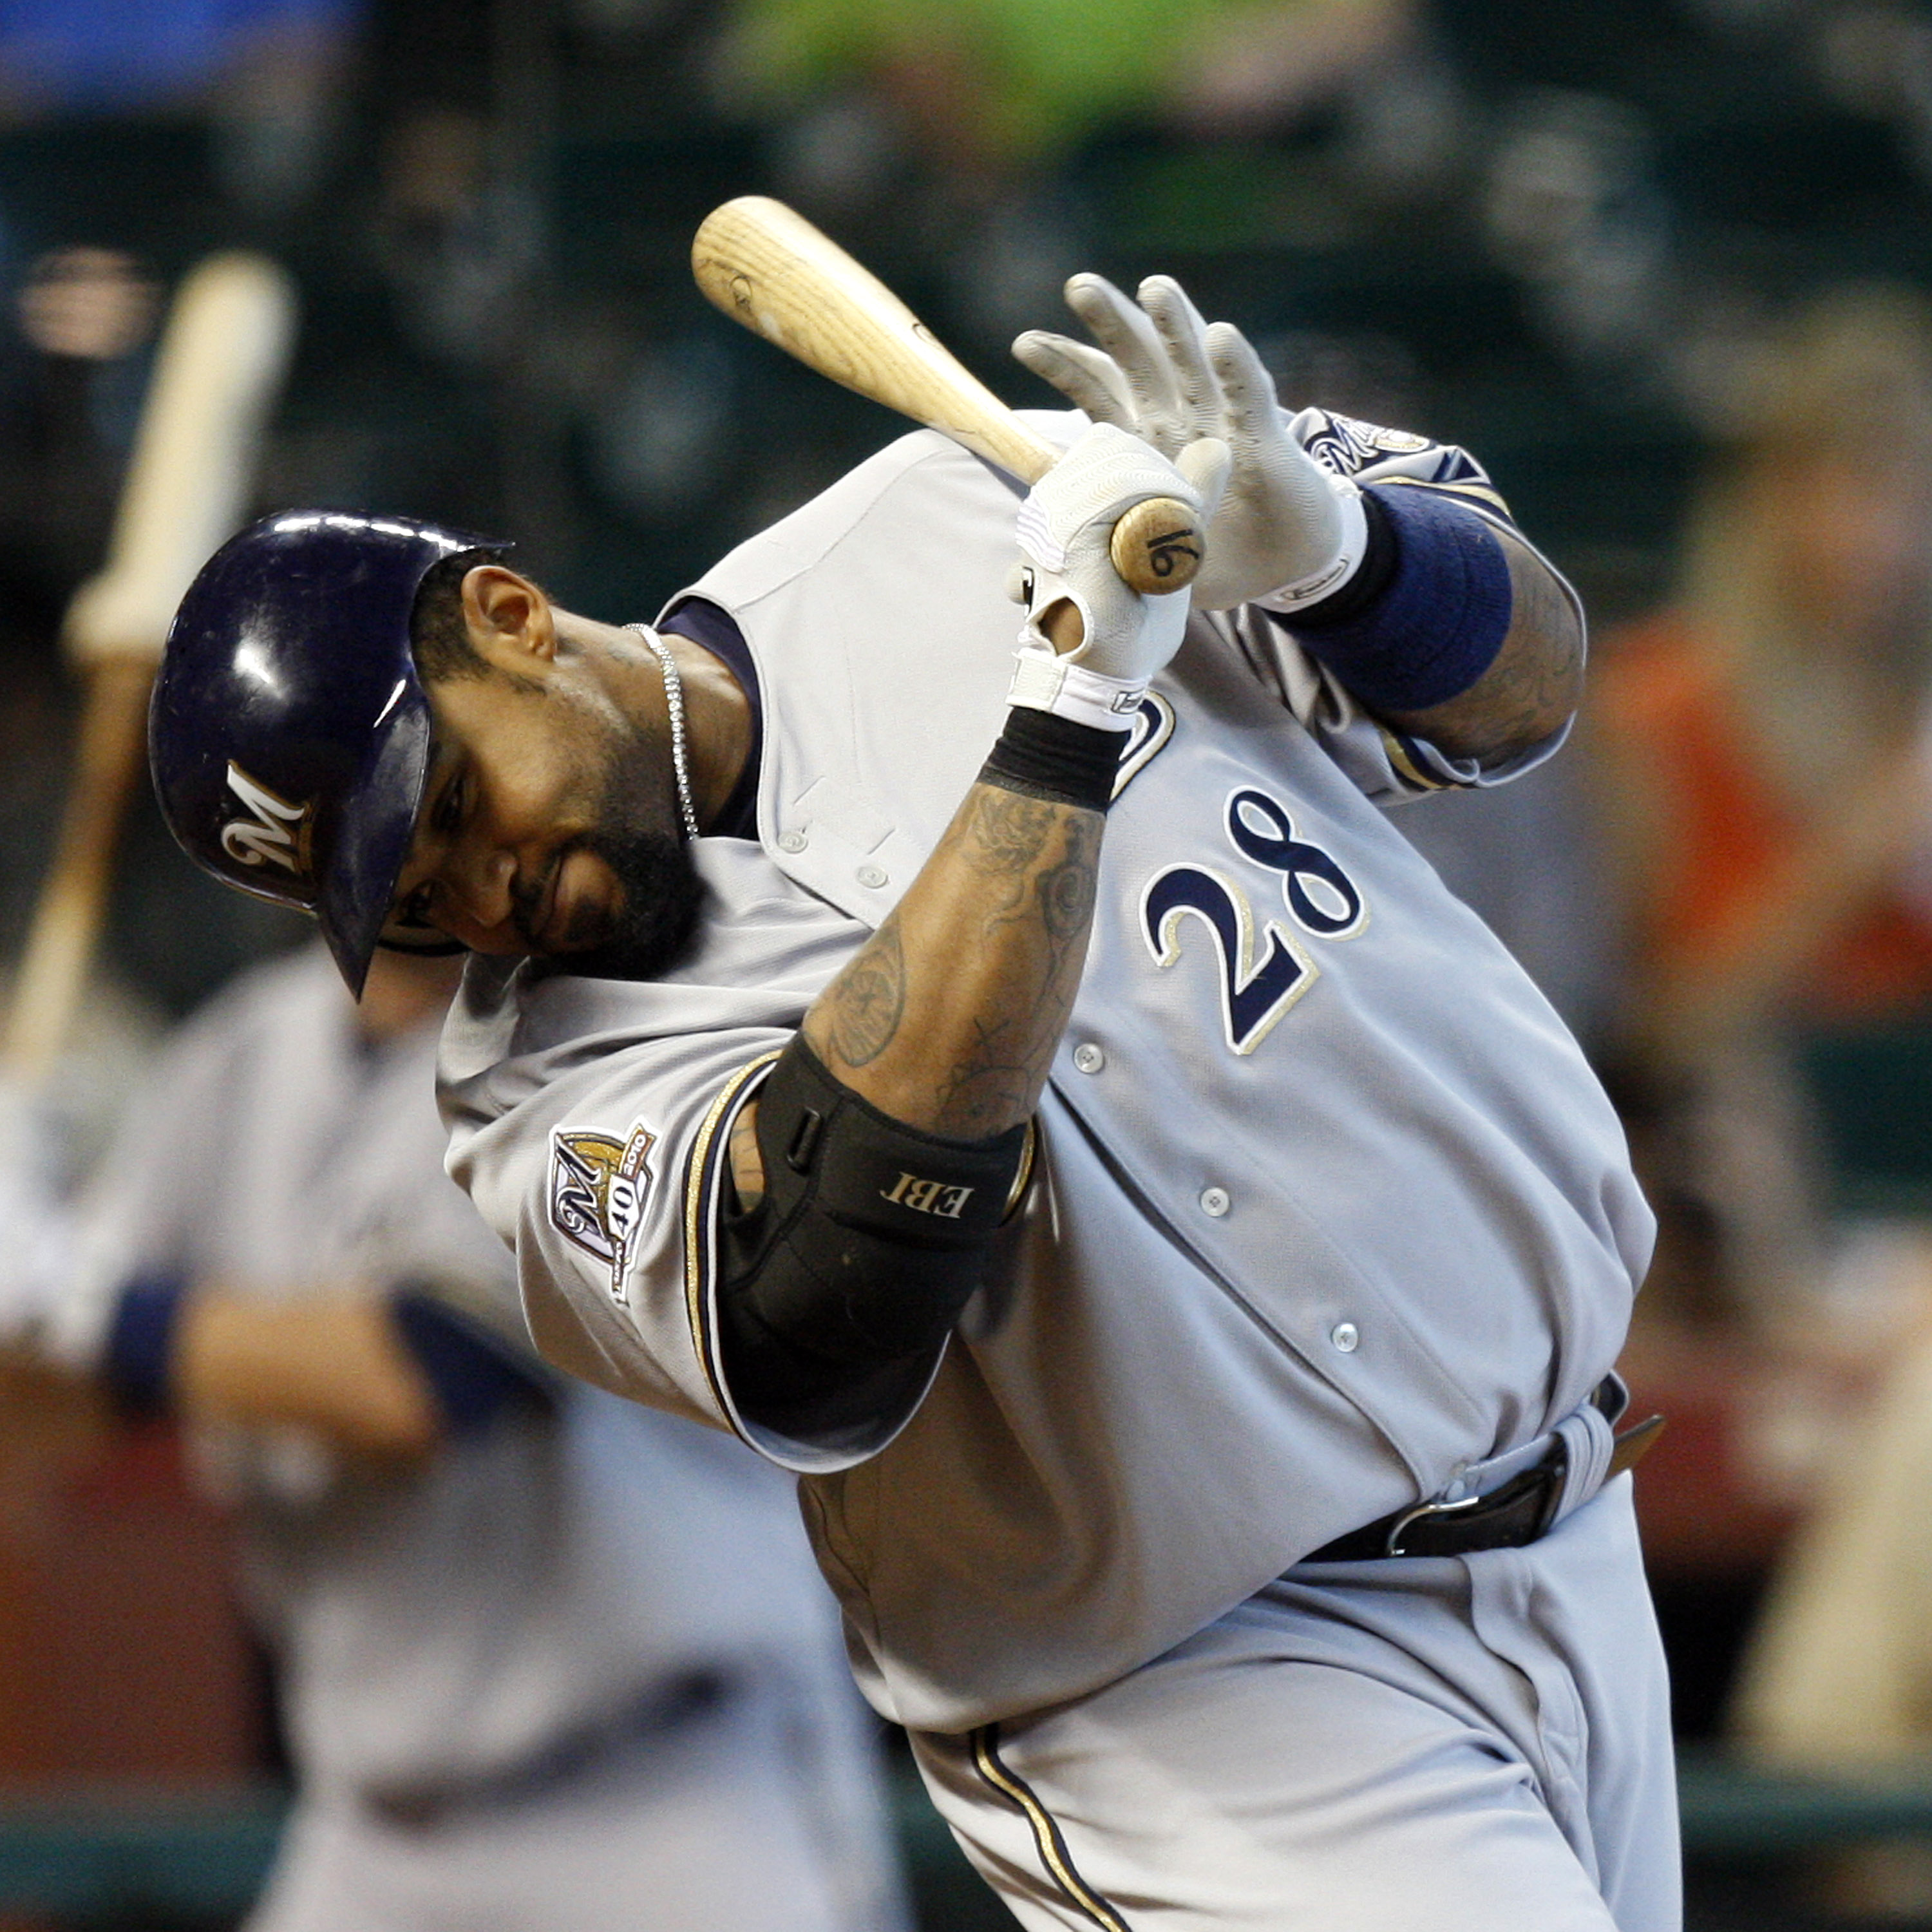 HOUSTON - SEPTEMBER 15:  Prince Fielder #28 of the Milwaukee Brewers avoids a high pitch inside thown by J.A. Happ of the Houston Astros at Minute Maid Park on September 15, 2010 in Houston, Texas.  (Photo by Bob Levey/Getty Images)